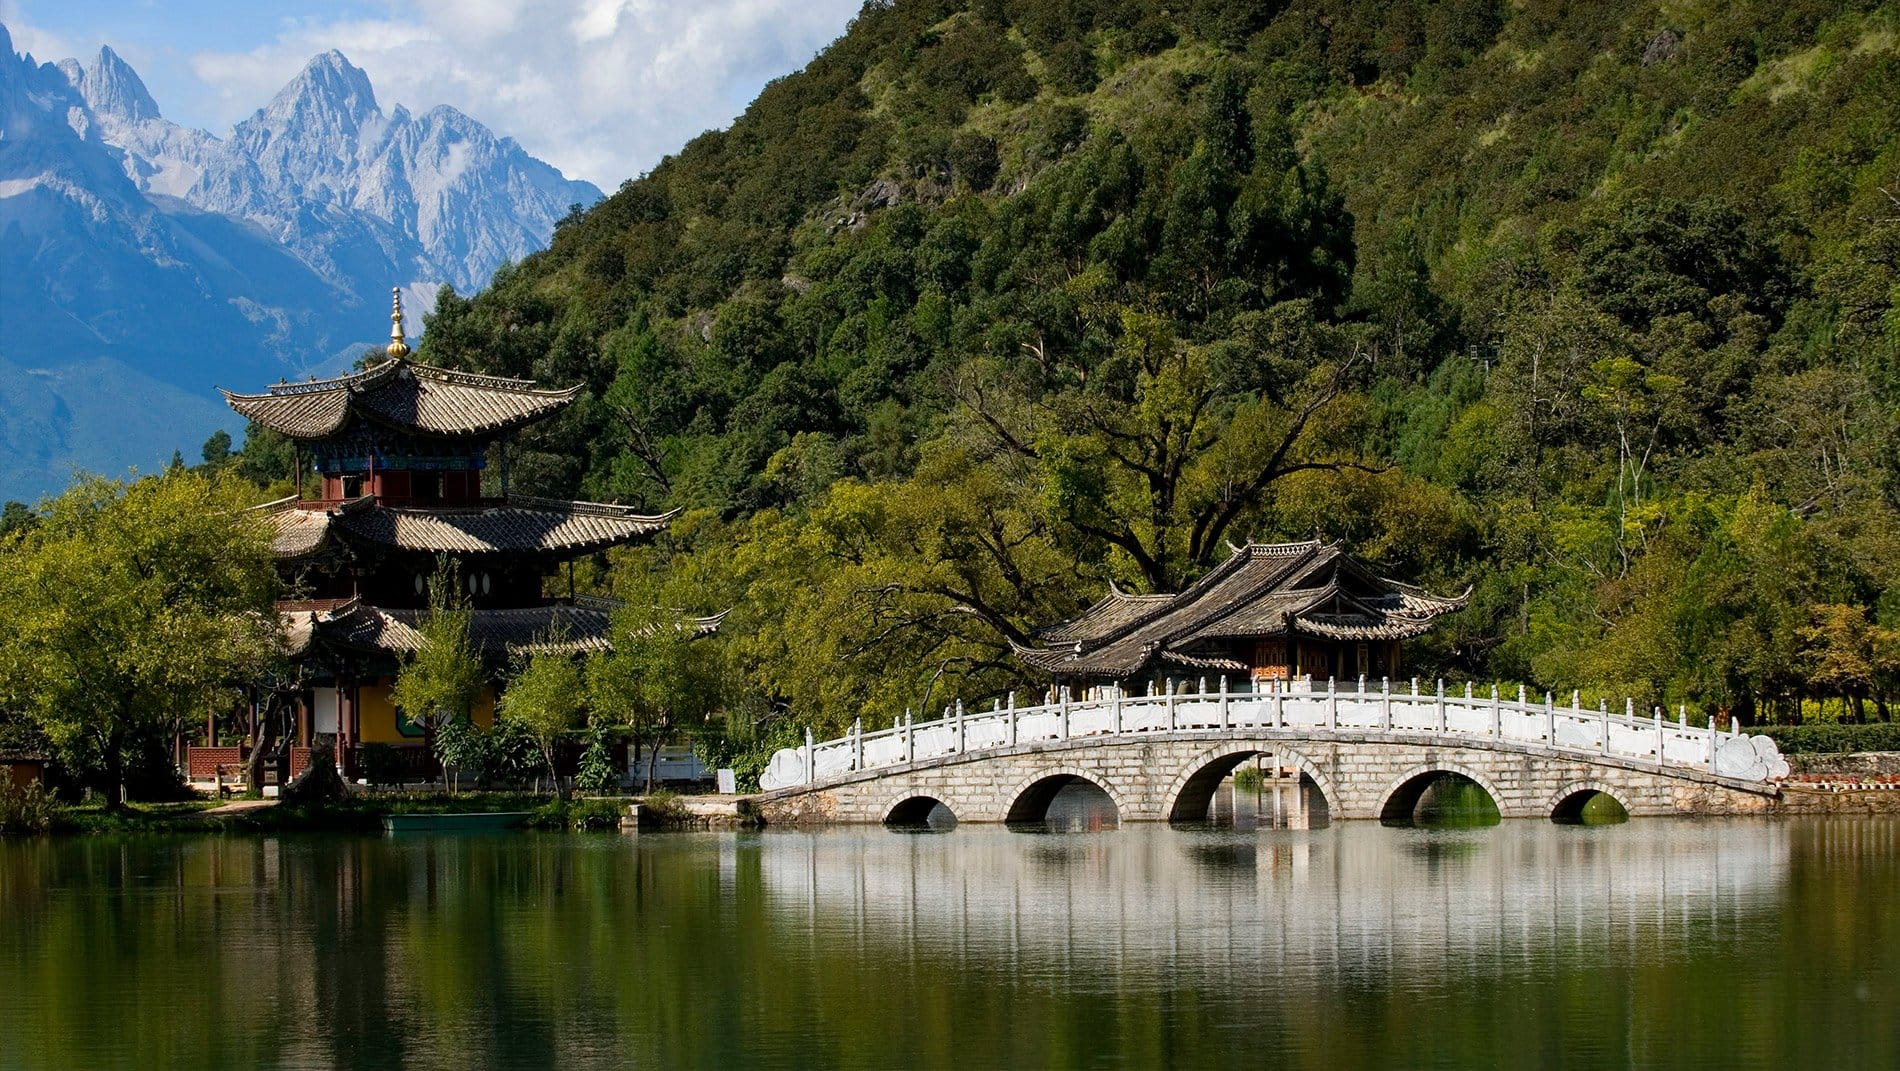 Jade Dragon Snow Mountain~The melting glacier overlooking Lijiang is the source of its freshwater and also a symbol of the challenging terrain of the Tea and Horse trade route on which Lijiang traditionally relied for its income.